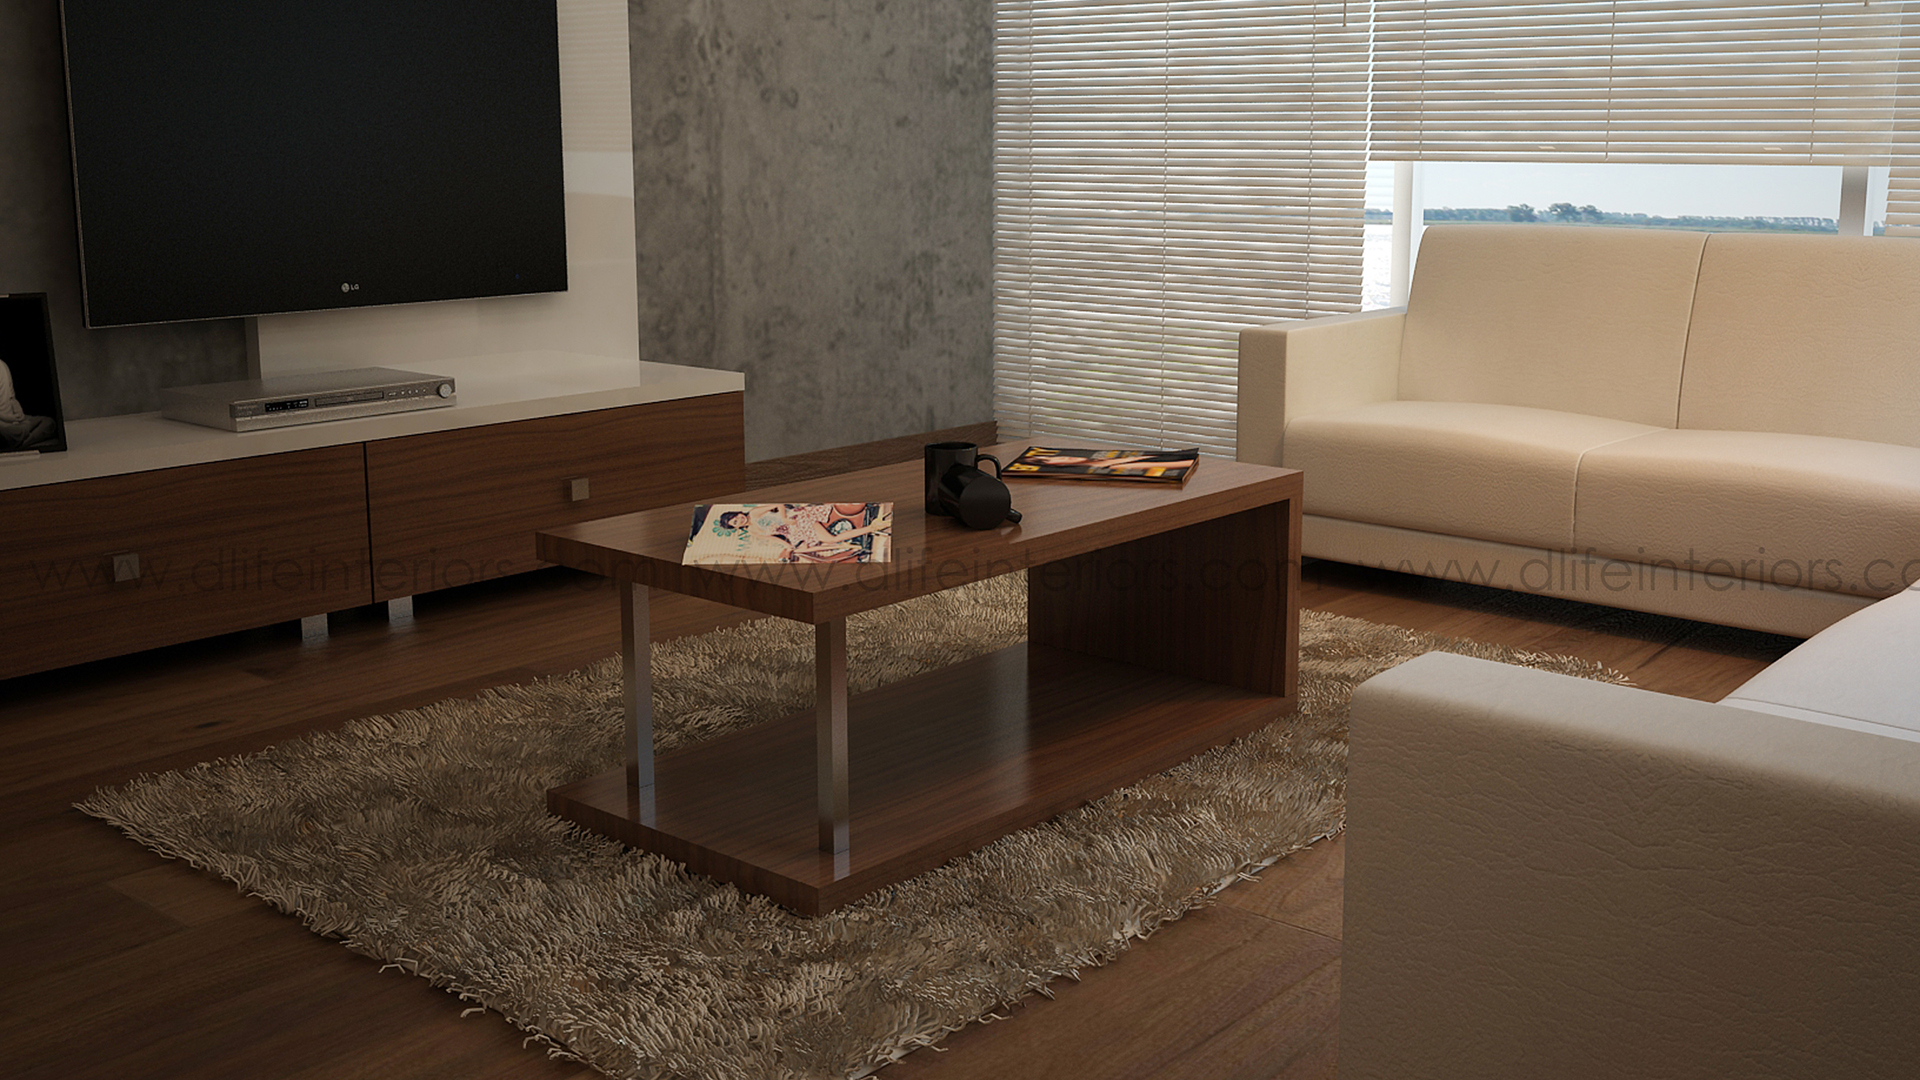 Customized centre table with canadian walnut colour and table top is used by the glass vase and magazines